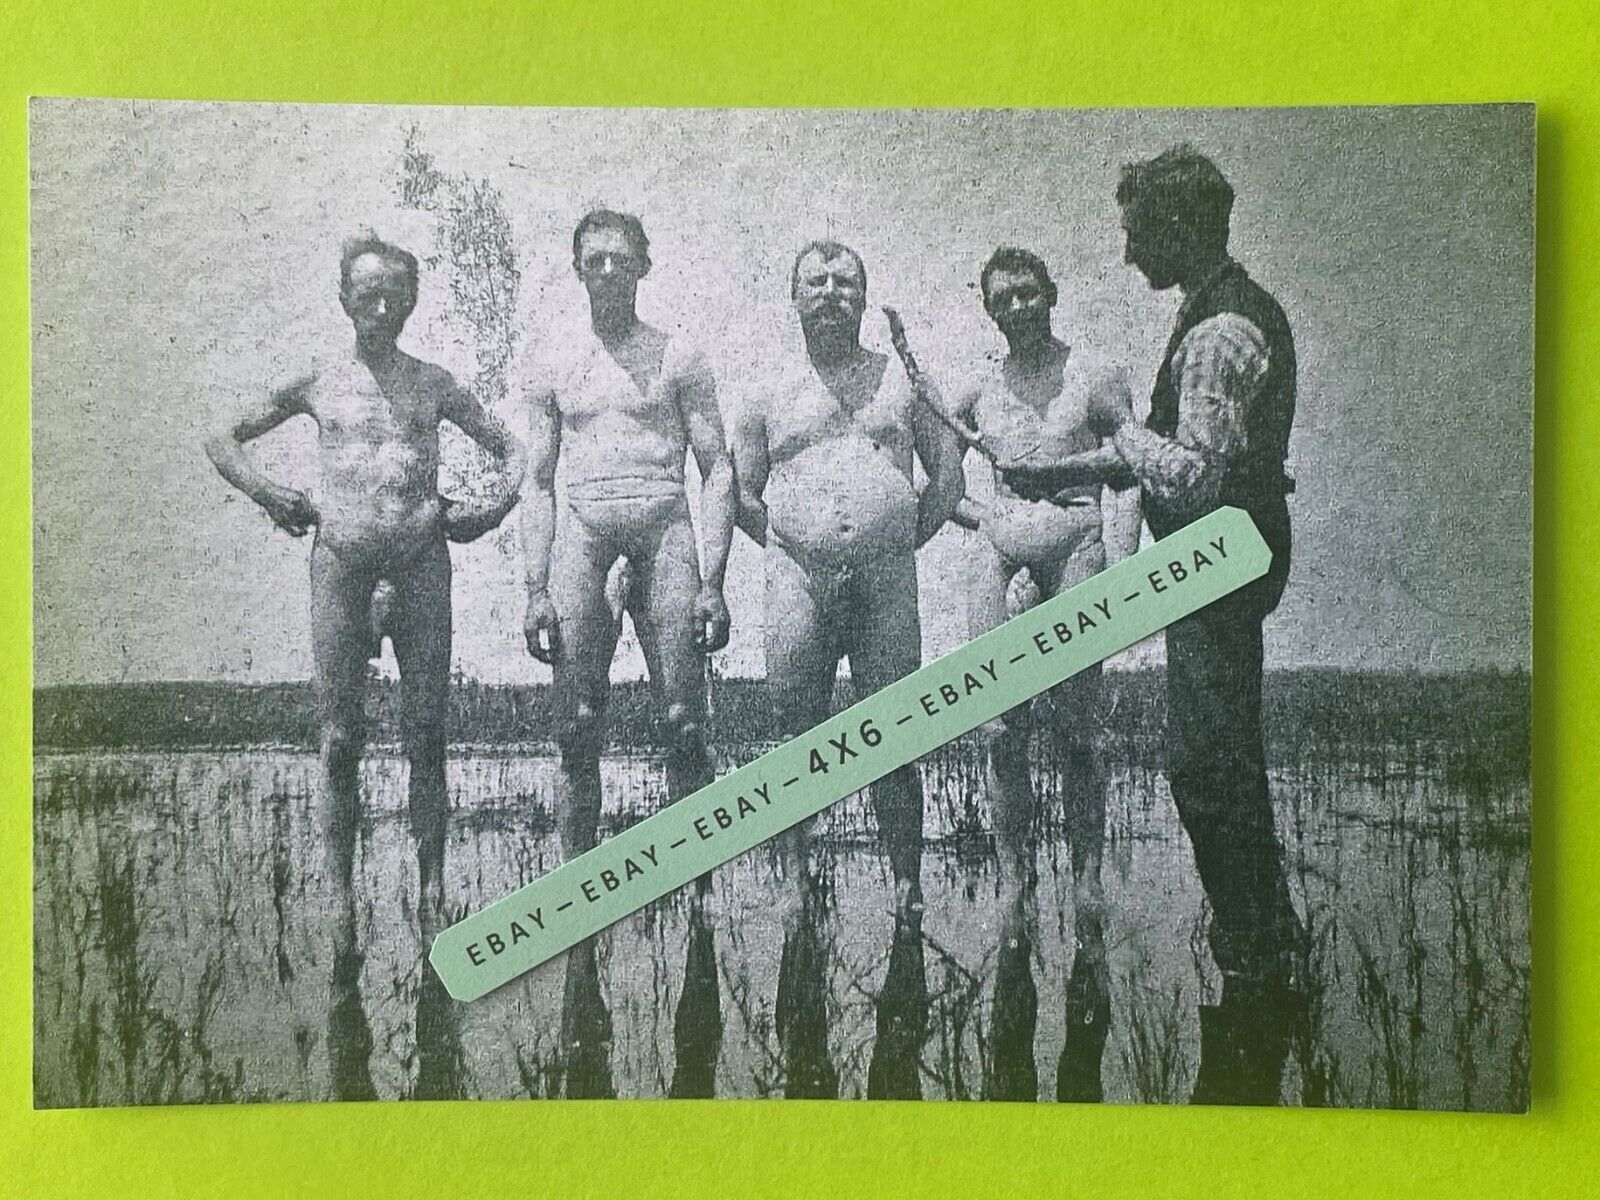 Found 4X6 Odd Strange Old Photo of Four Old Naked Men with Fish on Their Groin ?